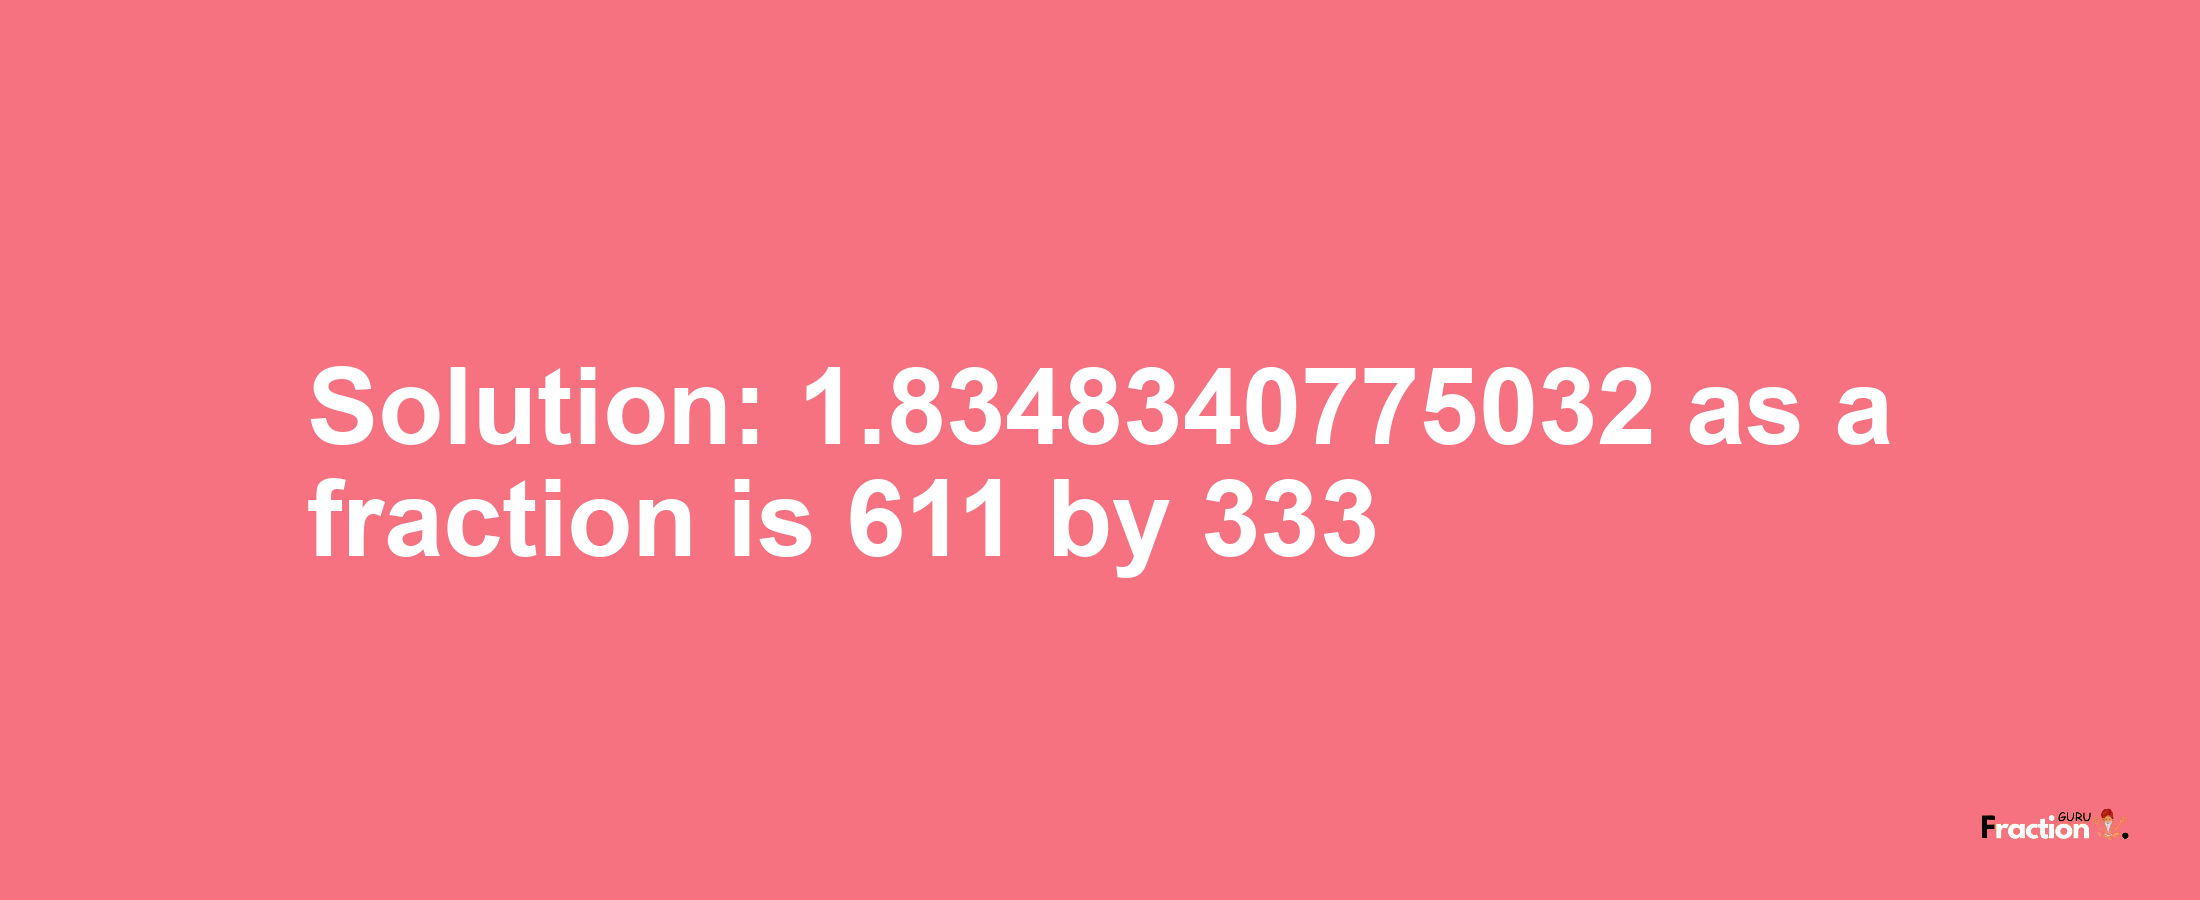 Solution:1.8348340775032 as a fraction is 611/333